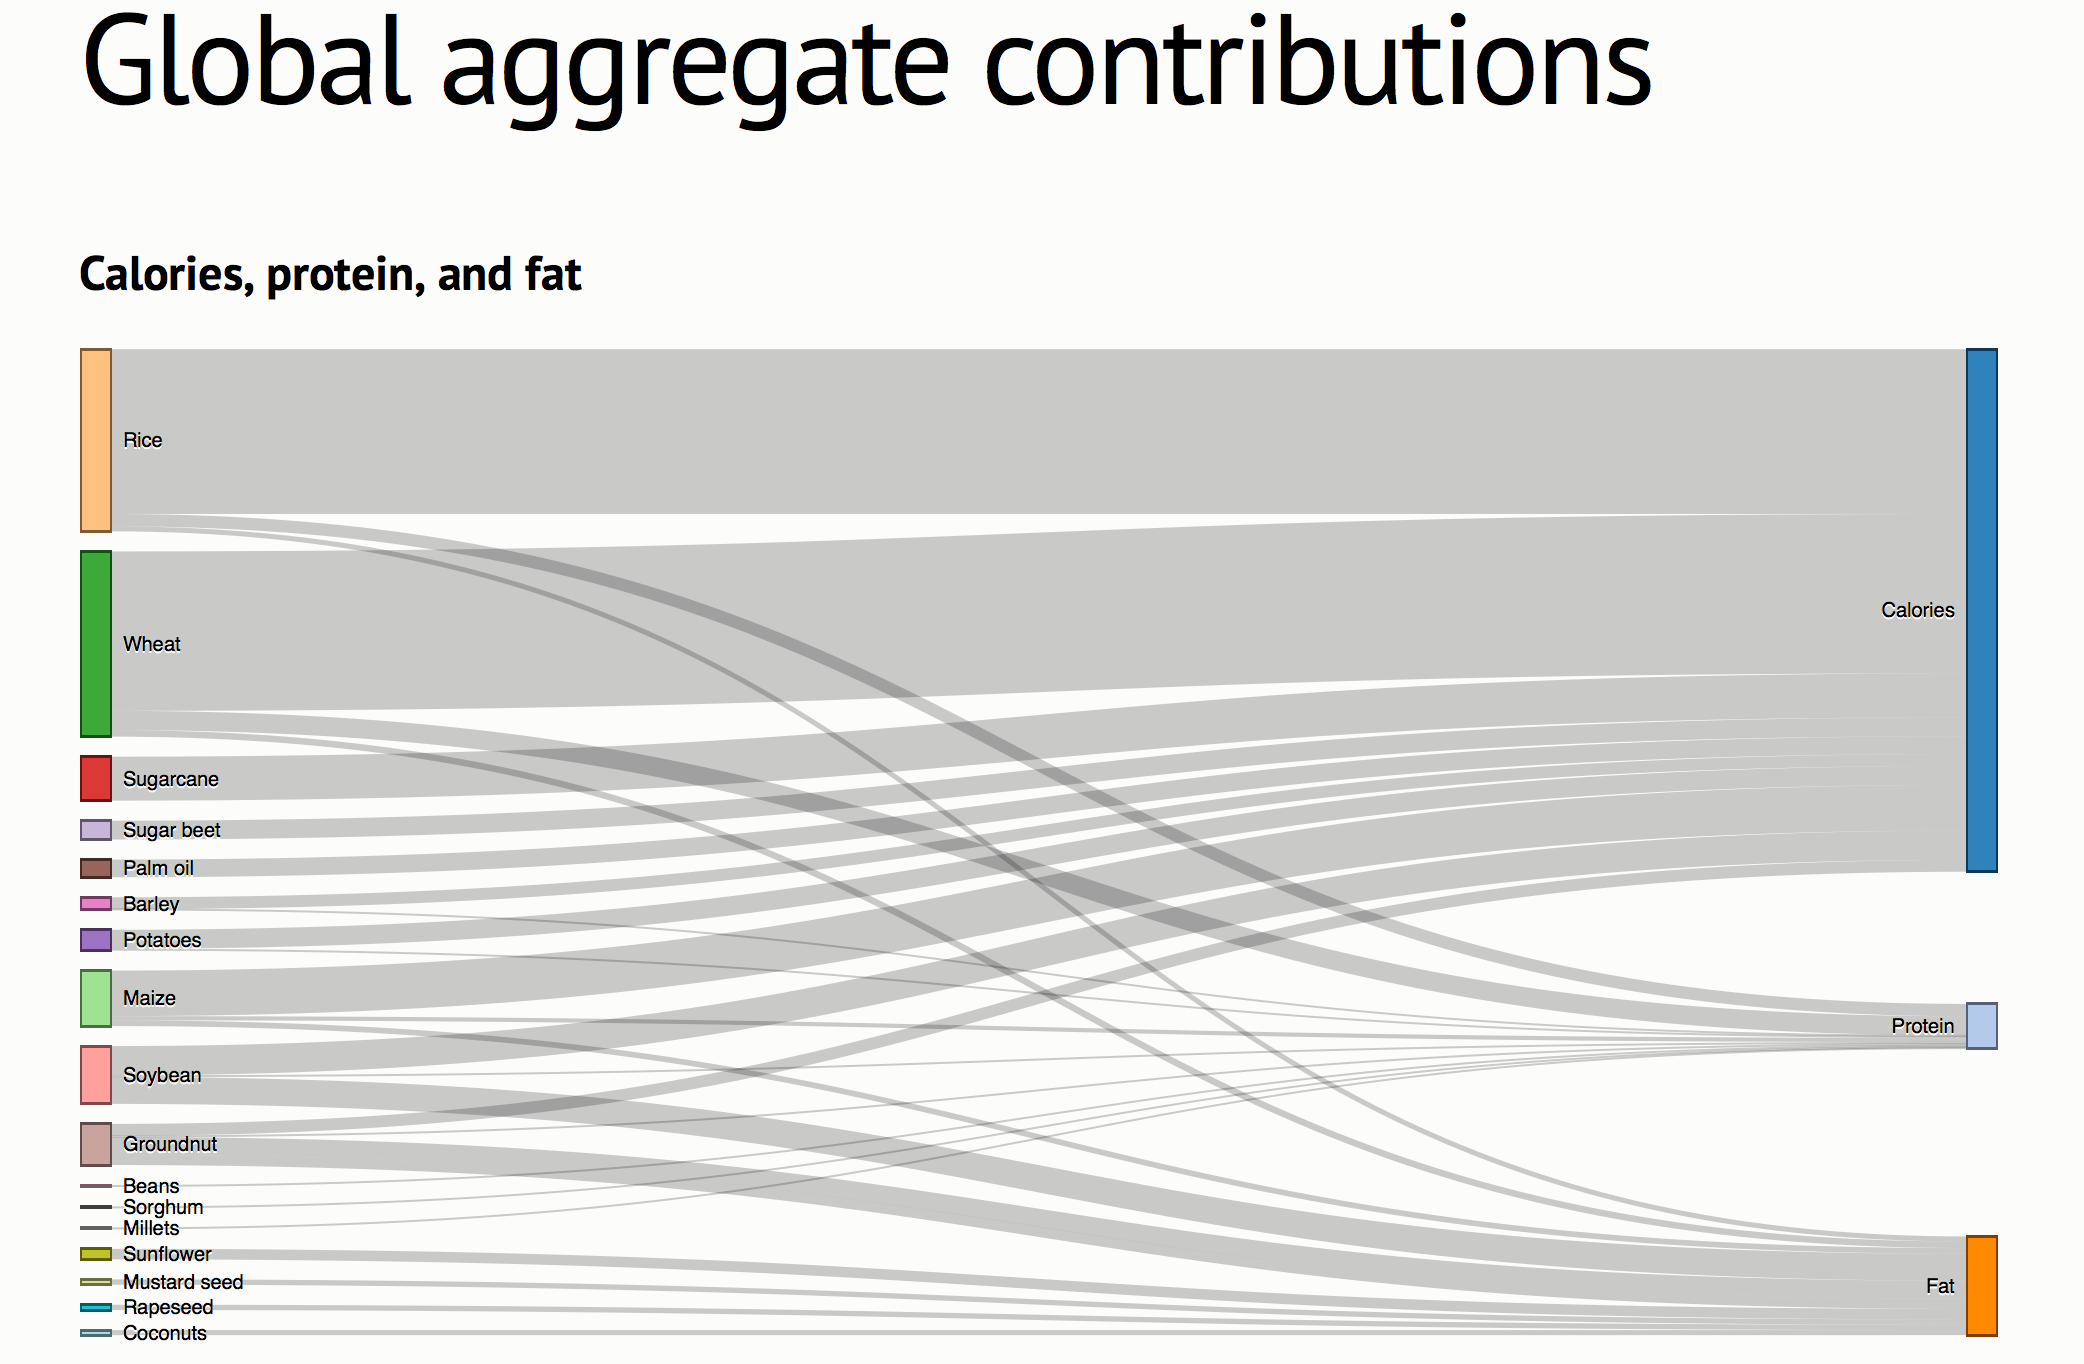 A Sankey diagram of global produce by calorie type. It shows a
                            variety of staple crops and what type of calorie they are (carbohydrate,
                            protein, or fat).